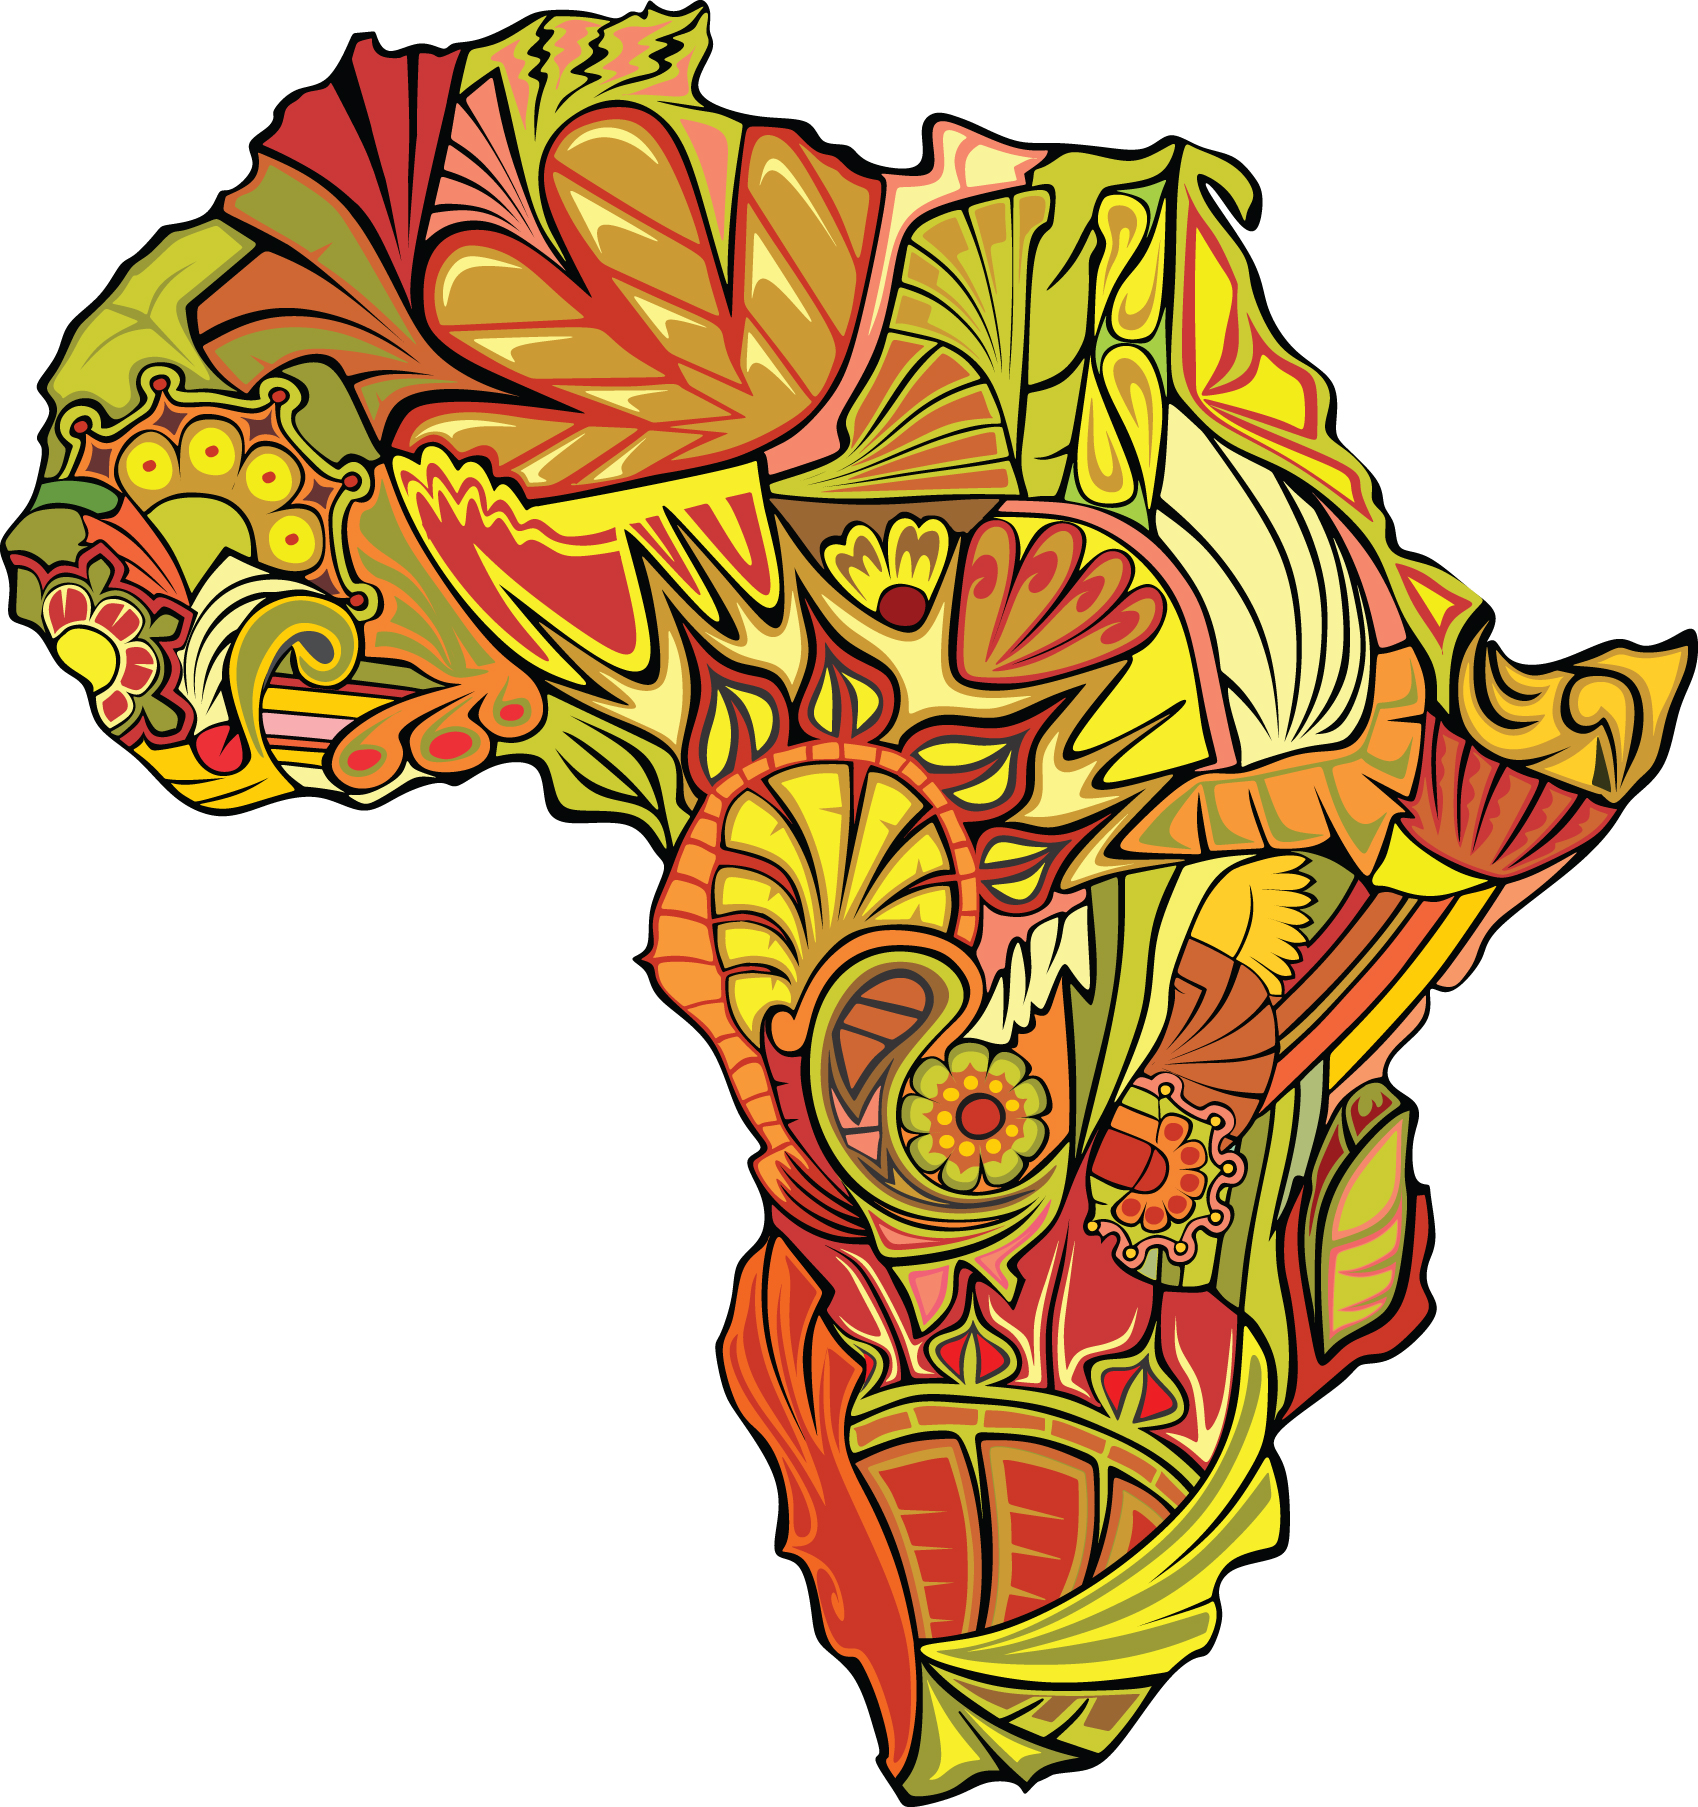 africa clipart images - photo #37